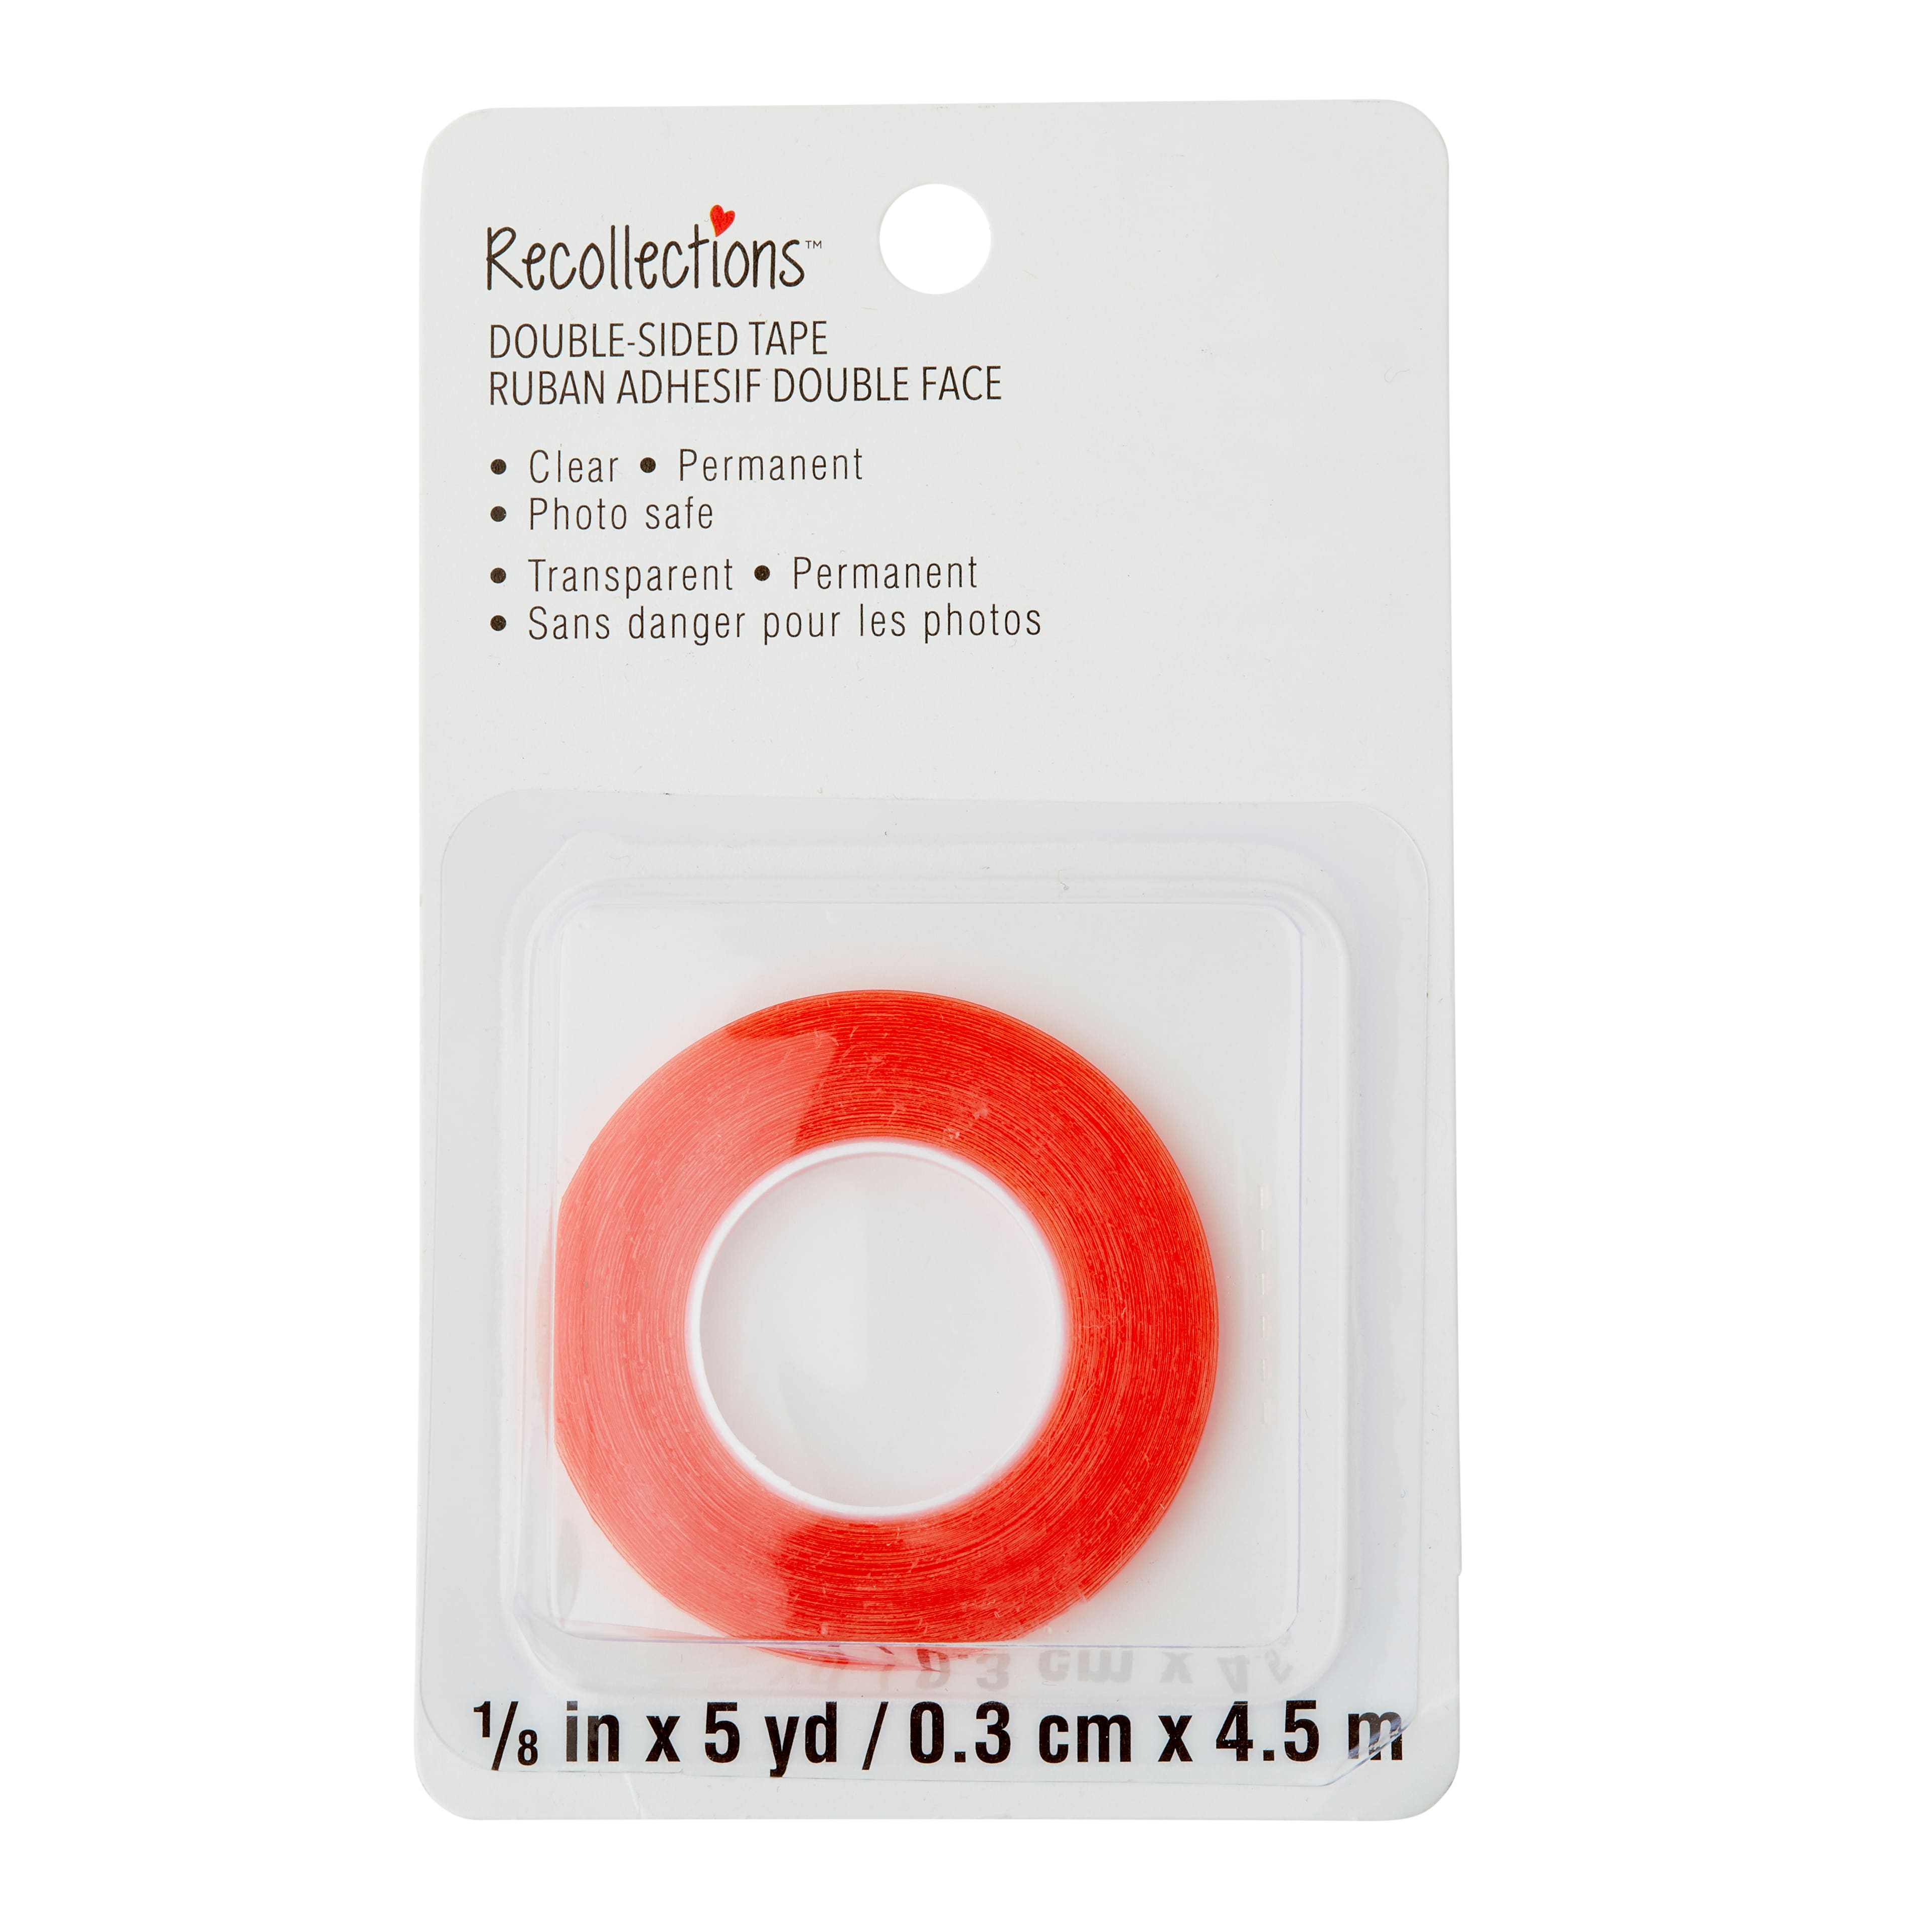 Glue Point 12mm, 2 Sided Adhesive Tape for Crafts, 1 Roll/100 pcs - Clear -  Bed Bath & Beyond - 37332347